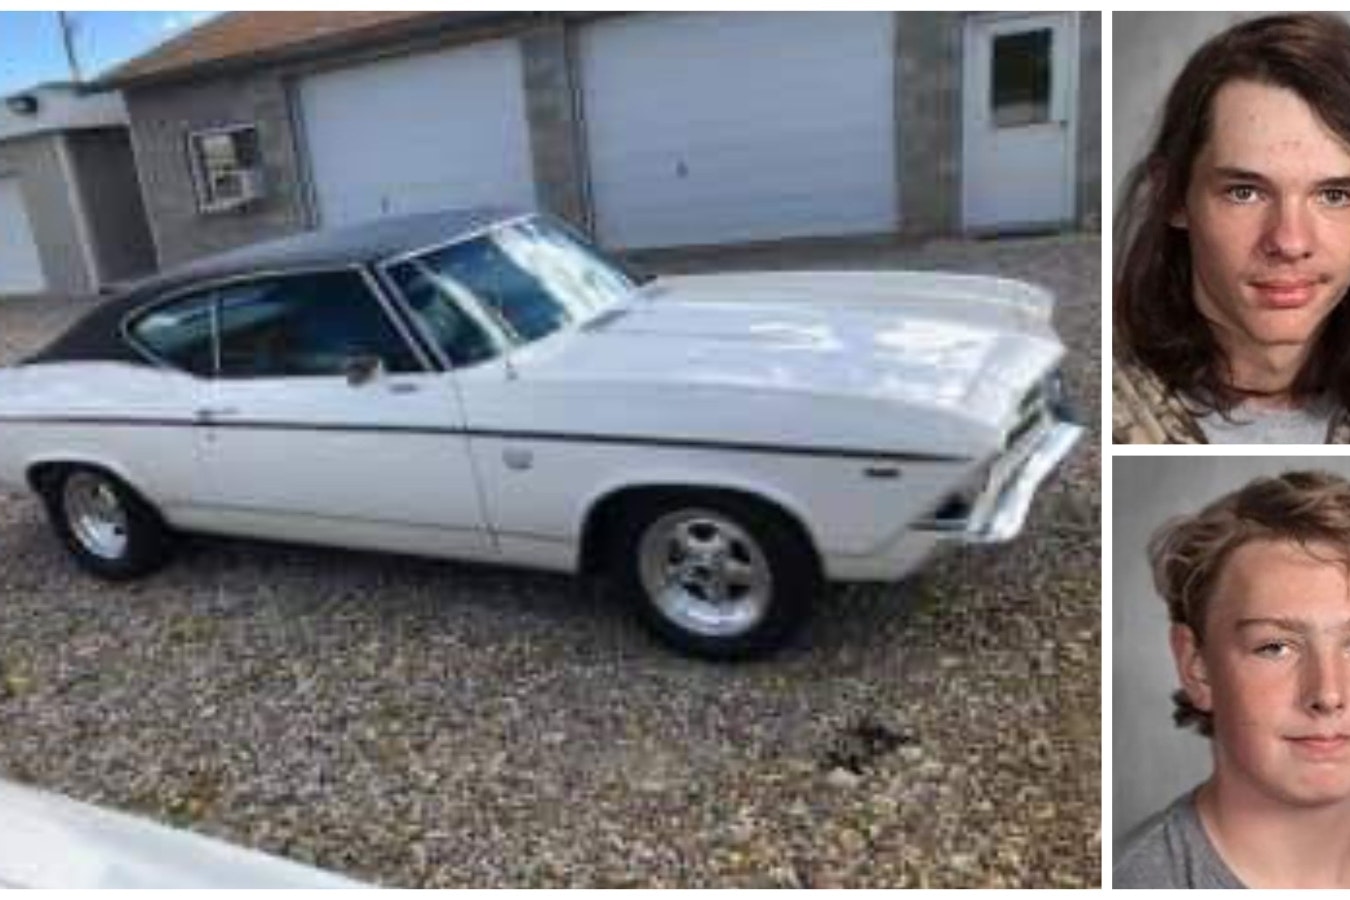 Otis Edlund, top right, and Quintin Wyrick Amarillo, both 16 and from Lander, Wyoming, are suspected of stealing this 1969 Chevy Chevelle.